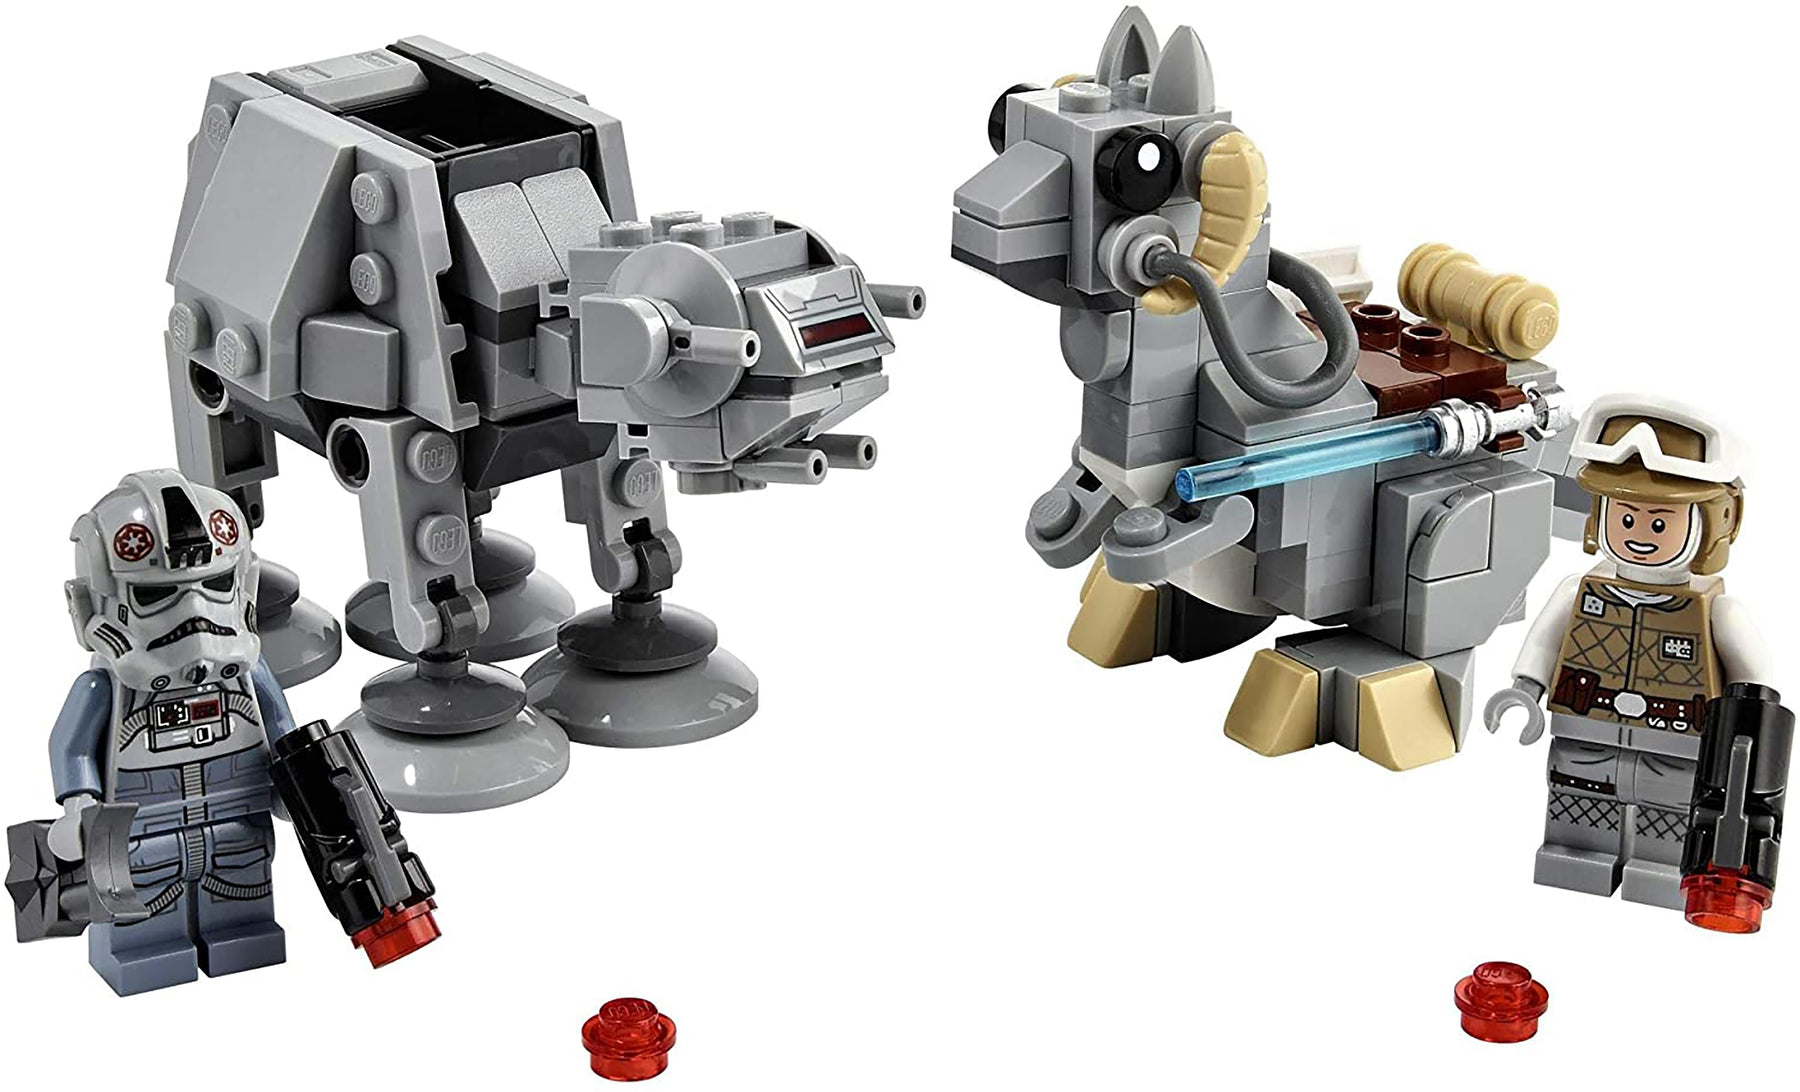 LEGO Star Wars 75298 AT-AT vs. Tauntaun Microfighters 205 Piece Building Kit